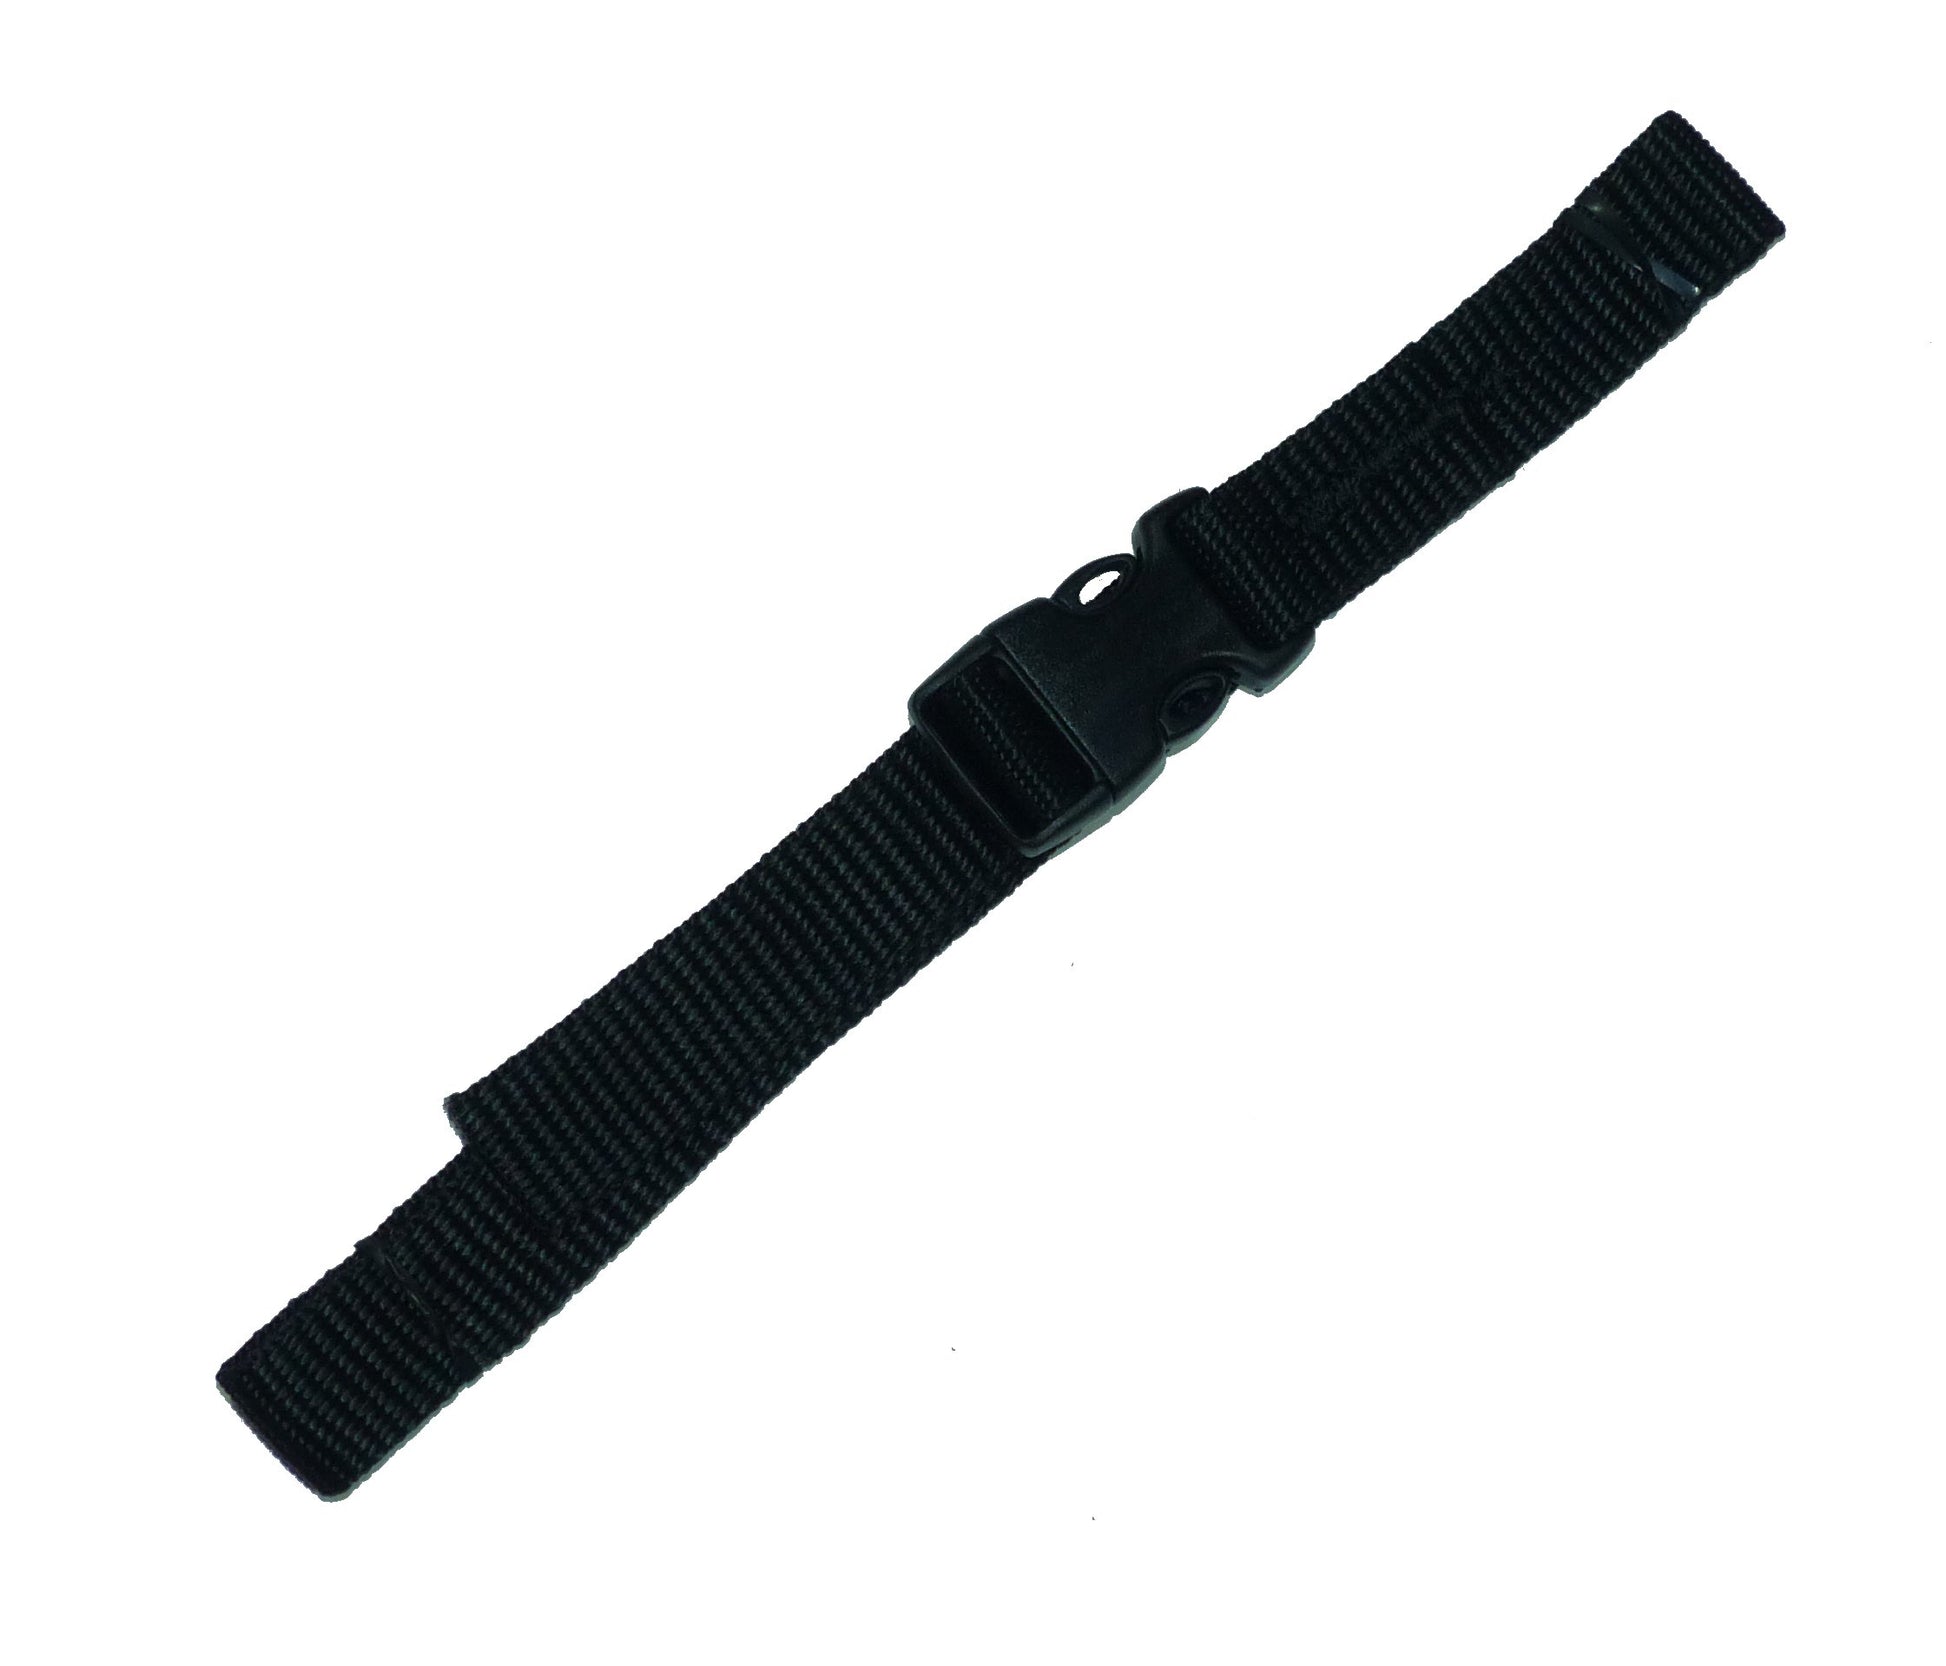 Benristraps 19mm Webbing Strap with Quick Release Buckle (Pair)